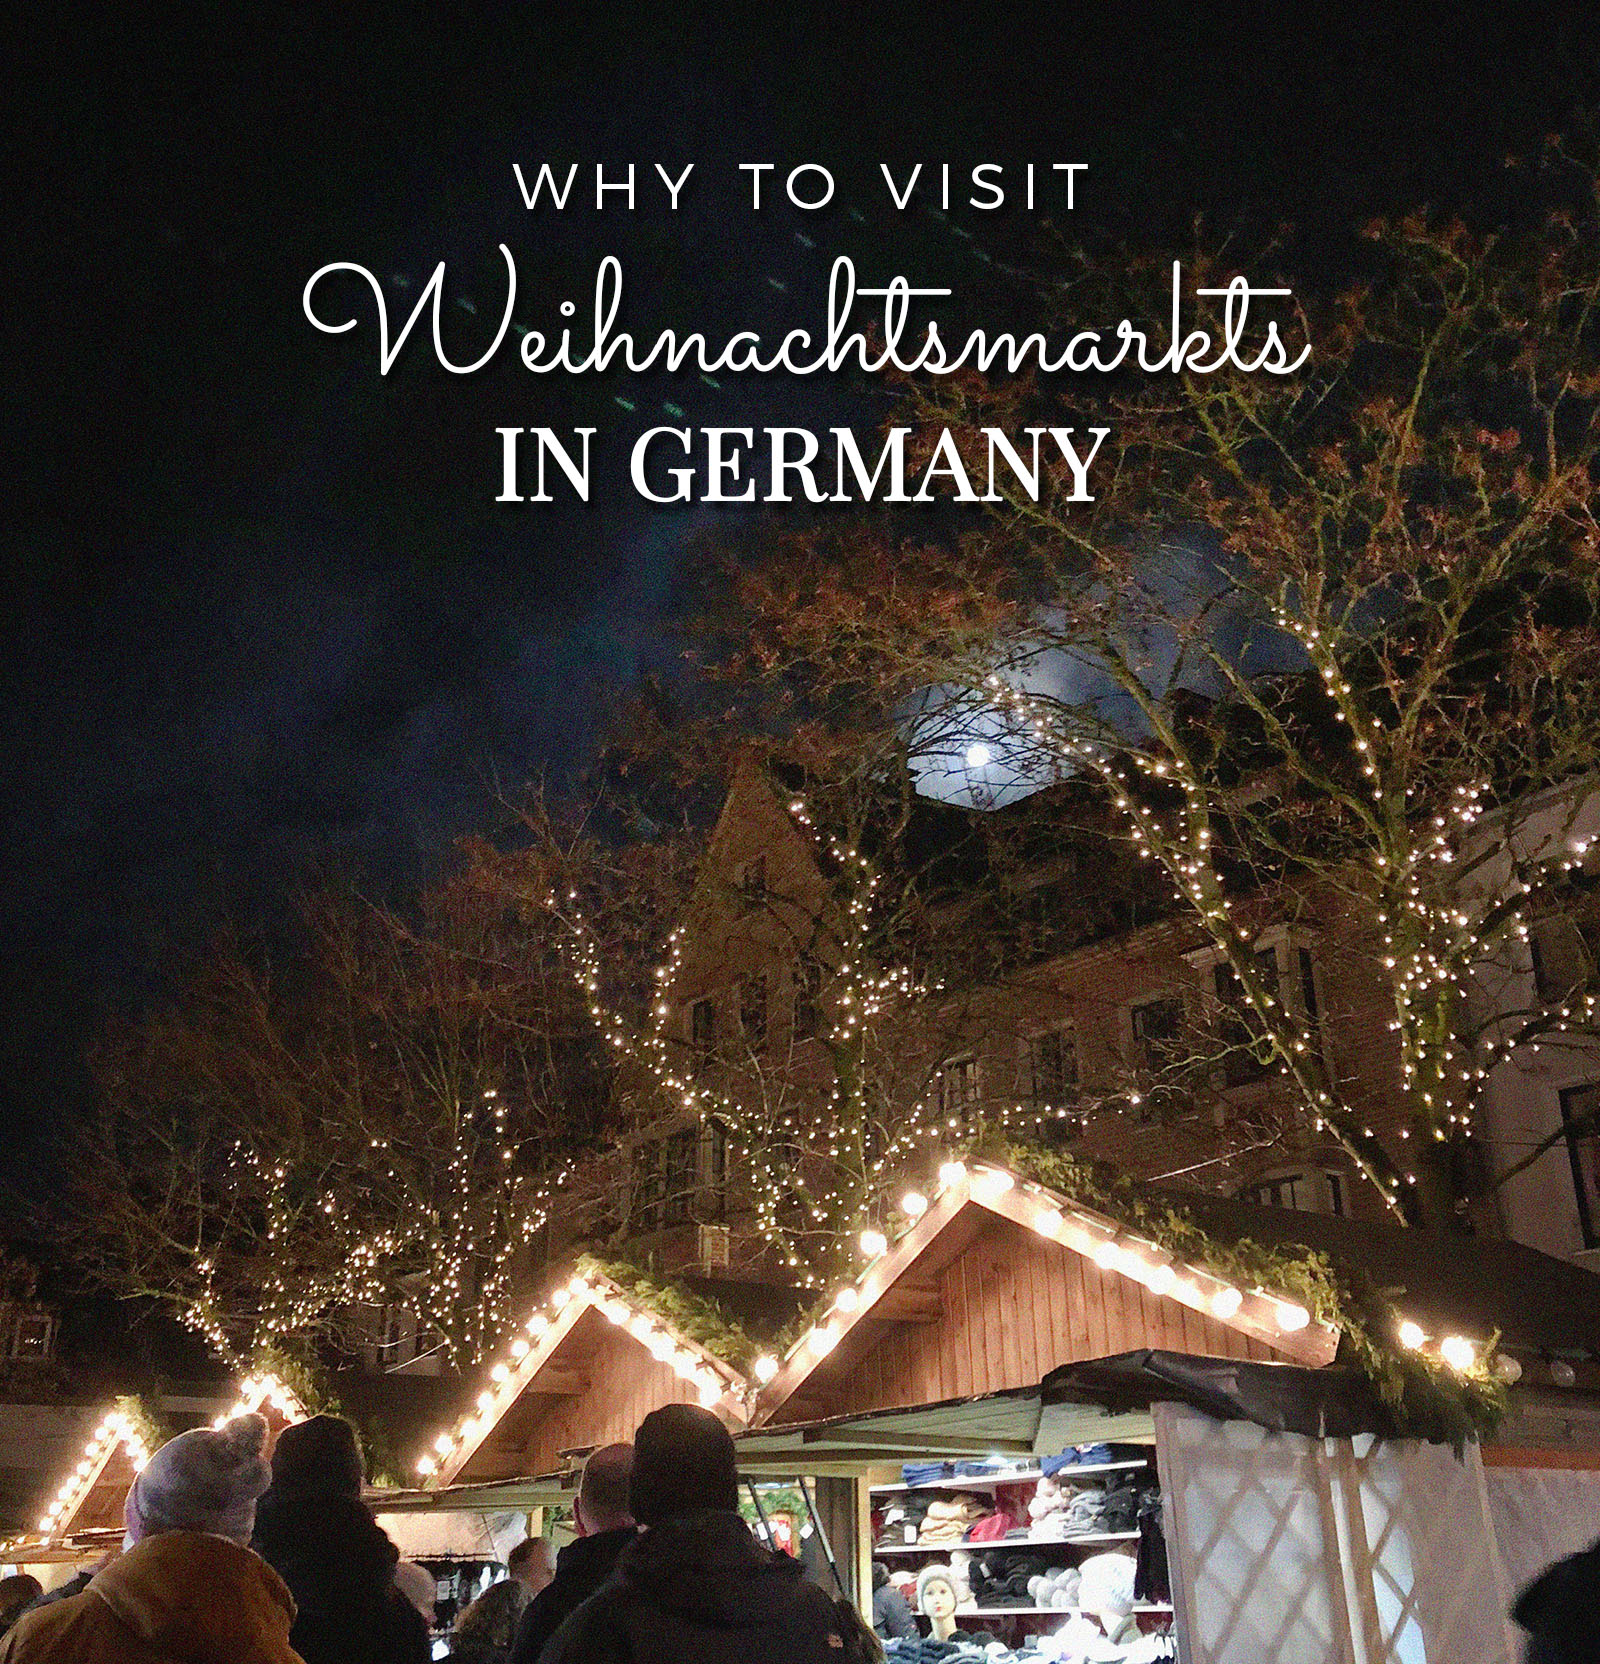 Why to visit a Christmas market in Germany